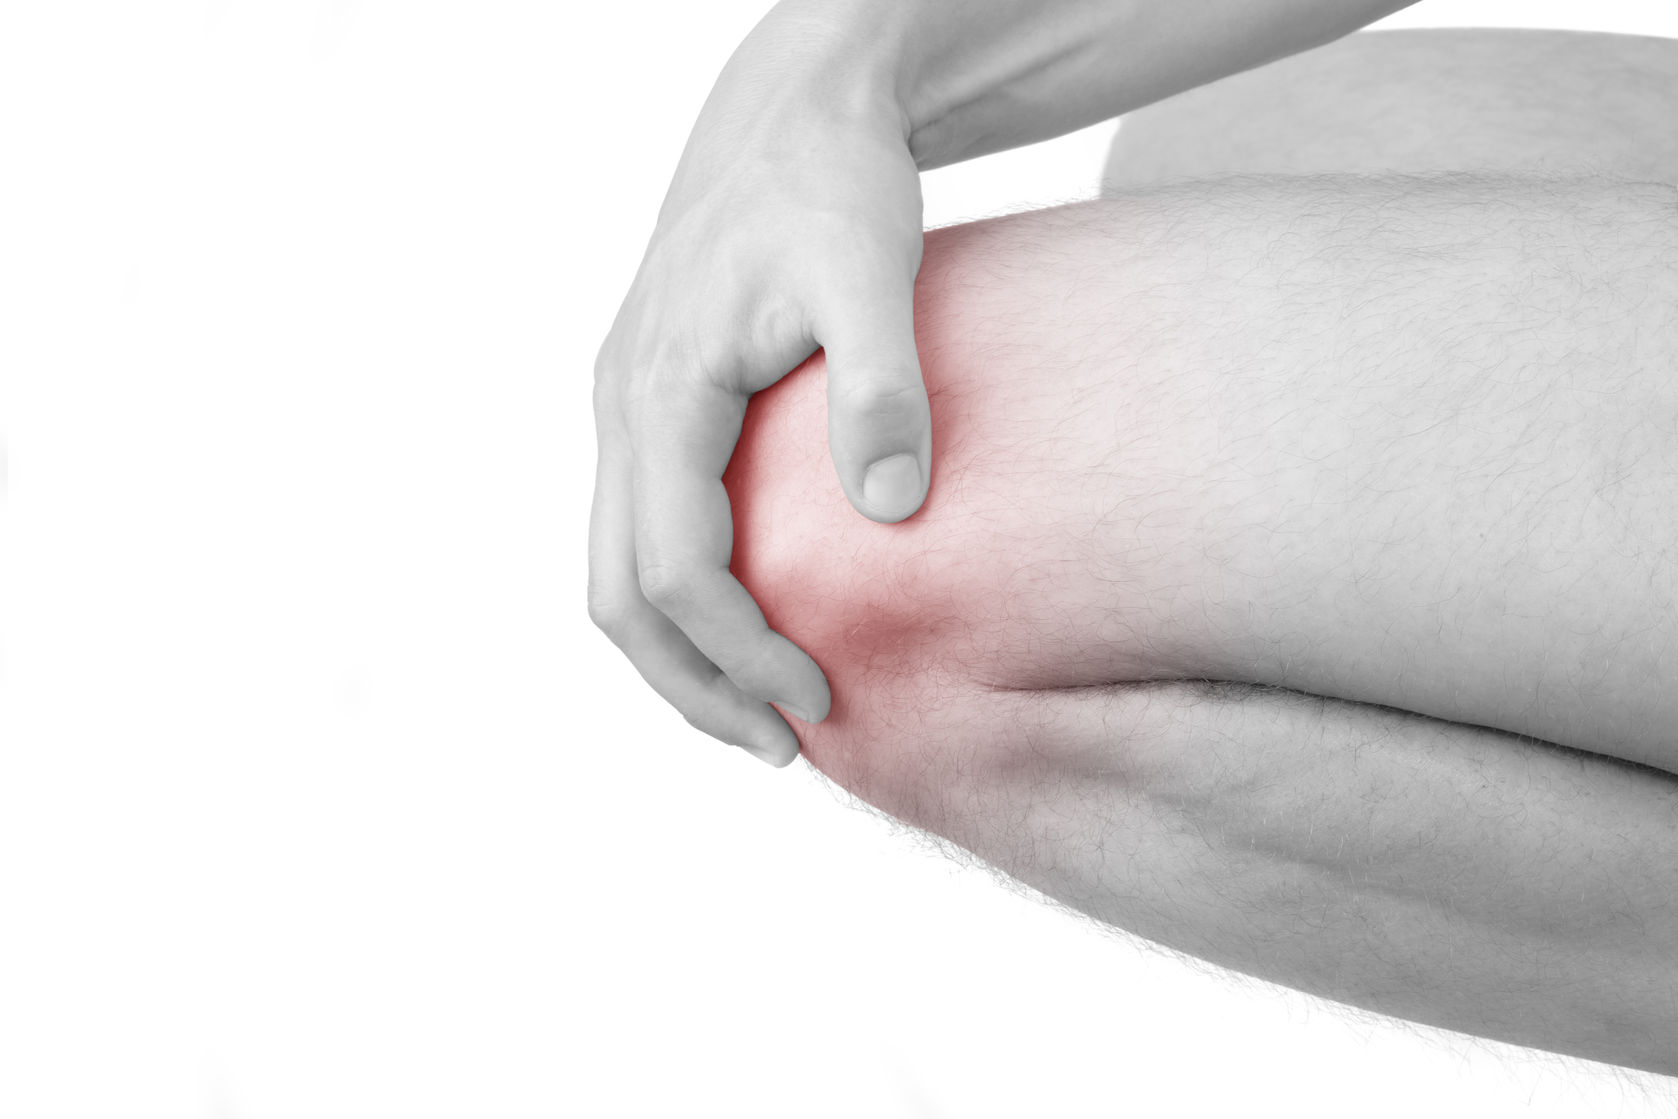 Knee injury. Man holding his knee with highlighted pain are isolated on white background. Health and medicine.